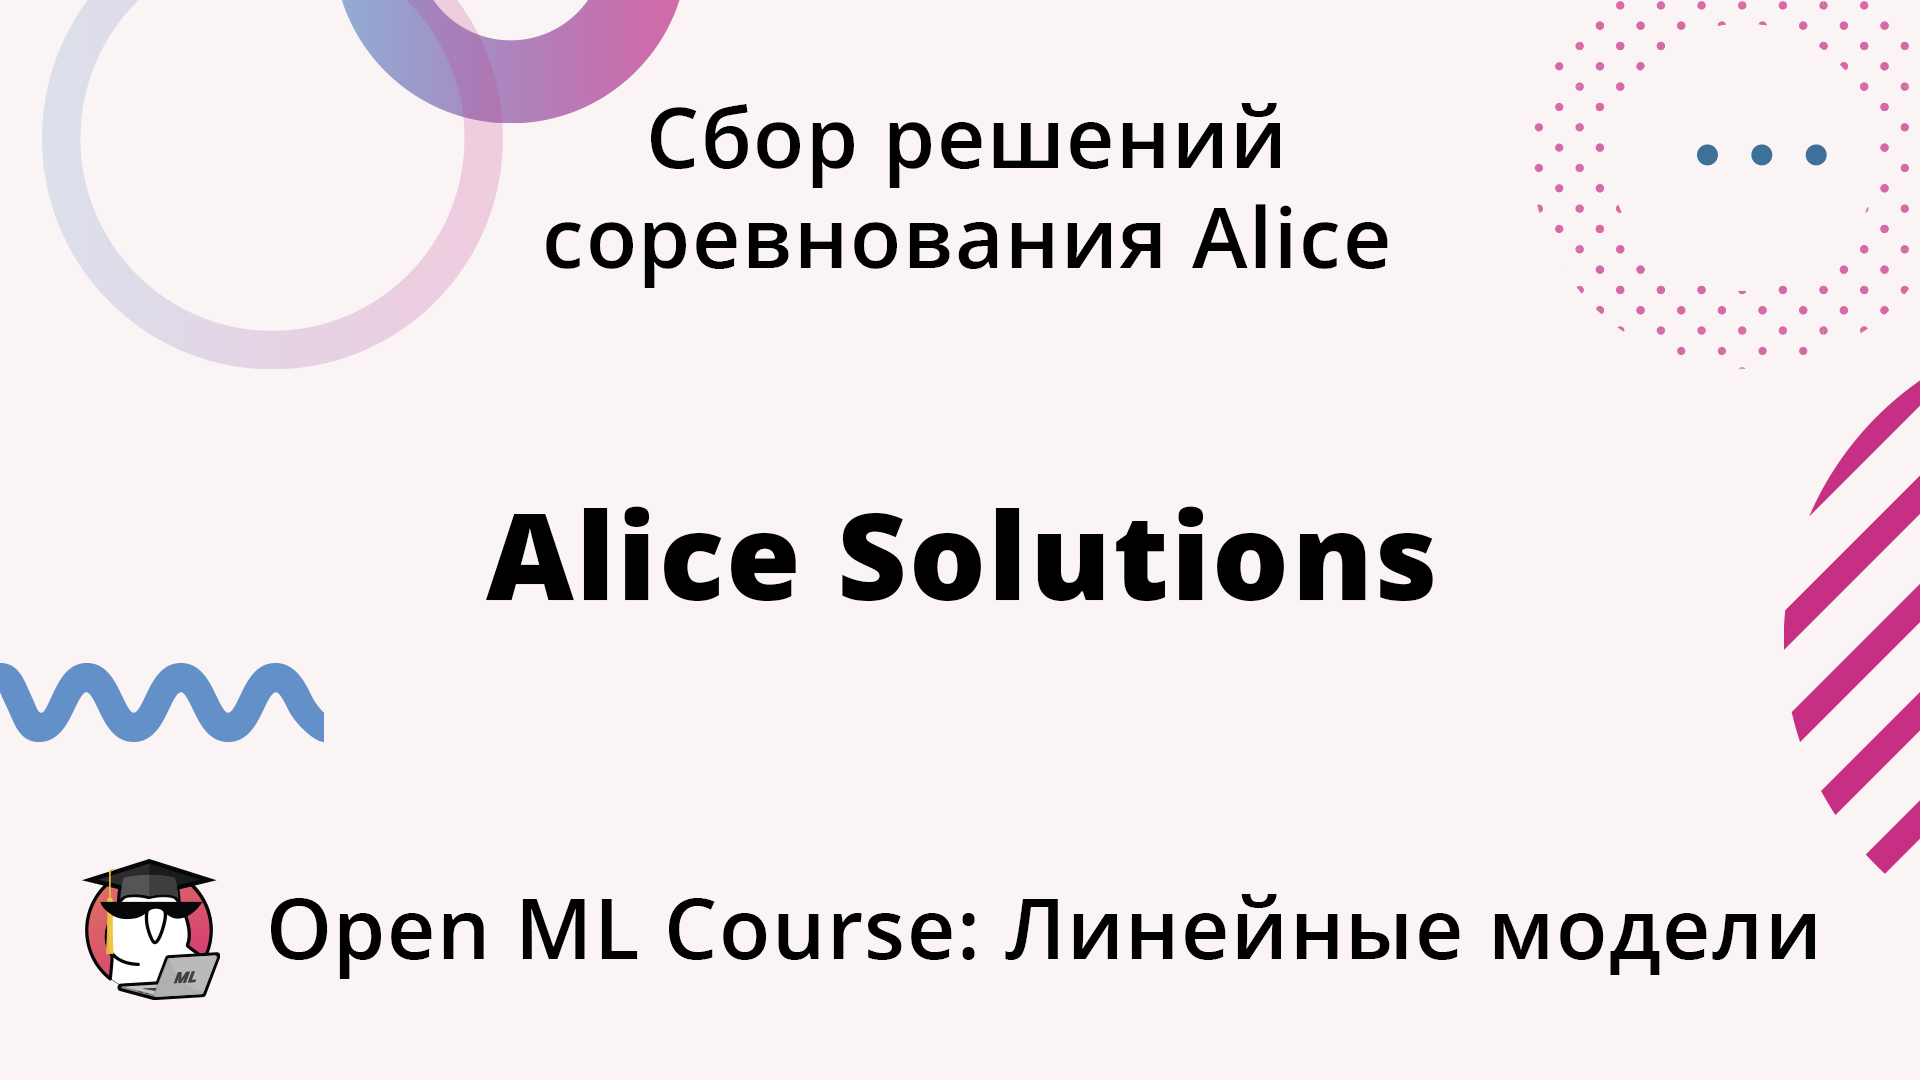 Alice Solutions